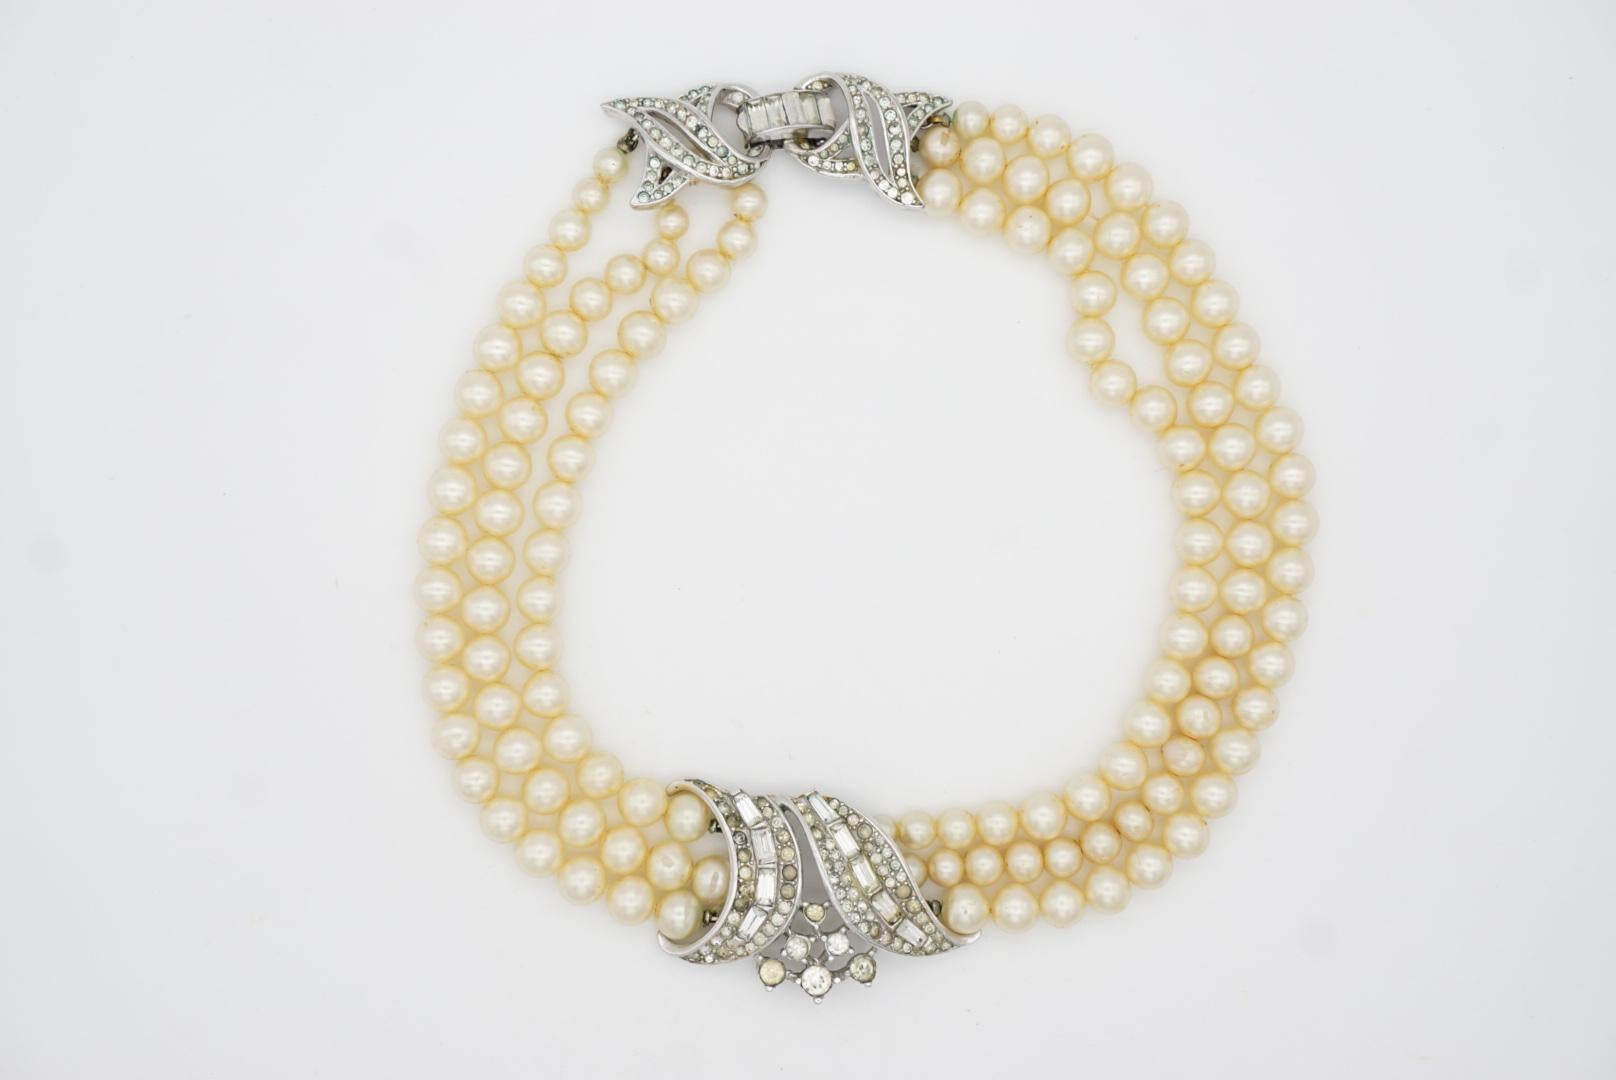 Crown Trifari 1940s Trio Strands Layer Pearls Crystals Pendant Choker Necklace For Sale 5